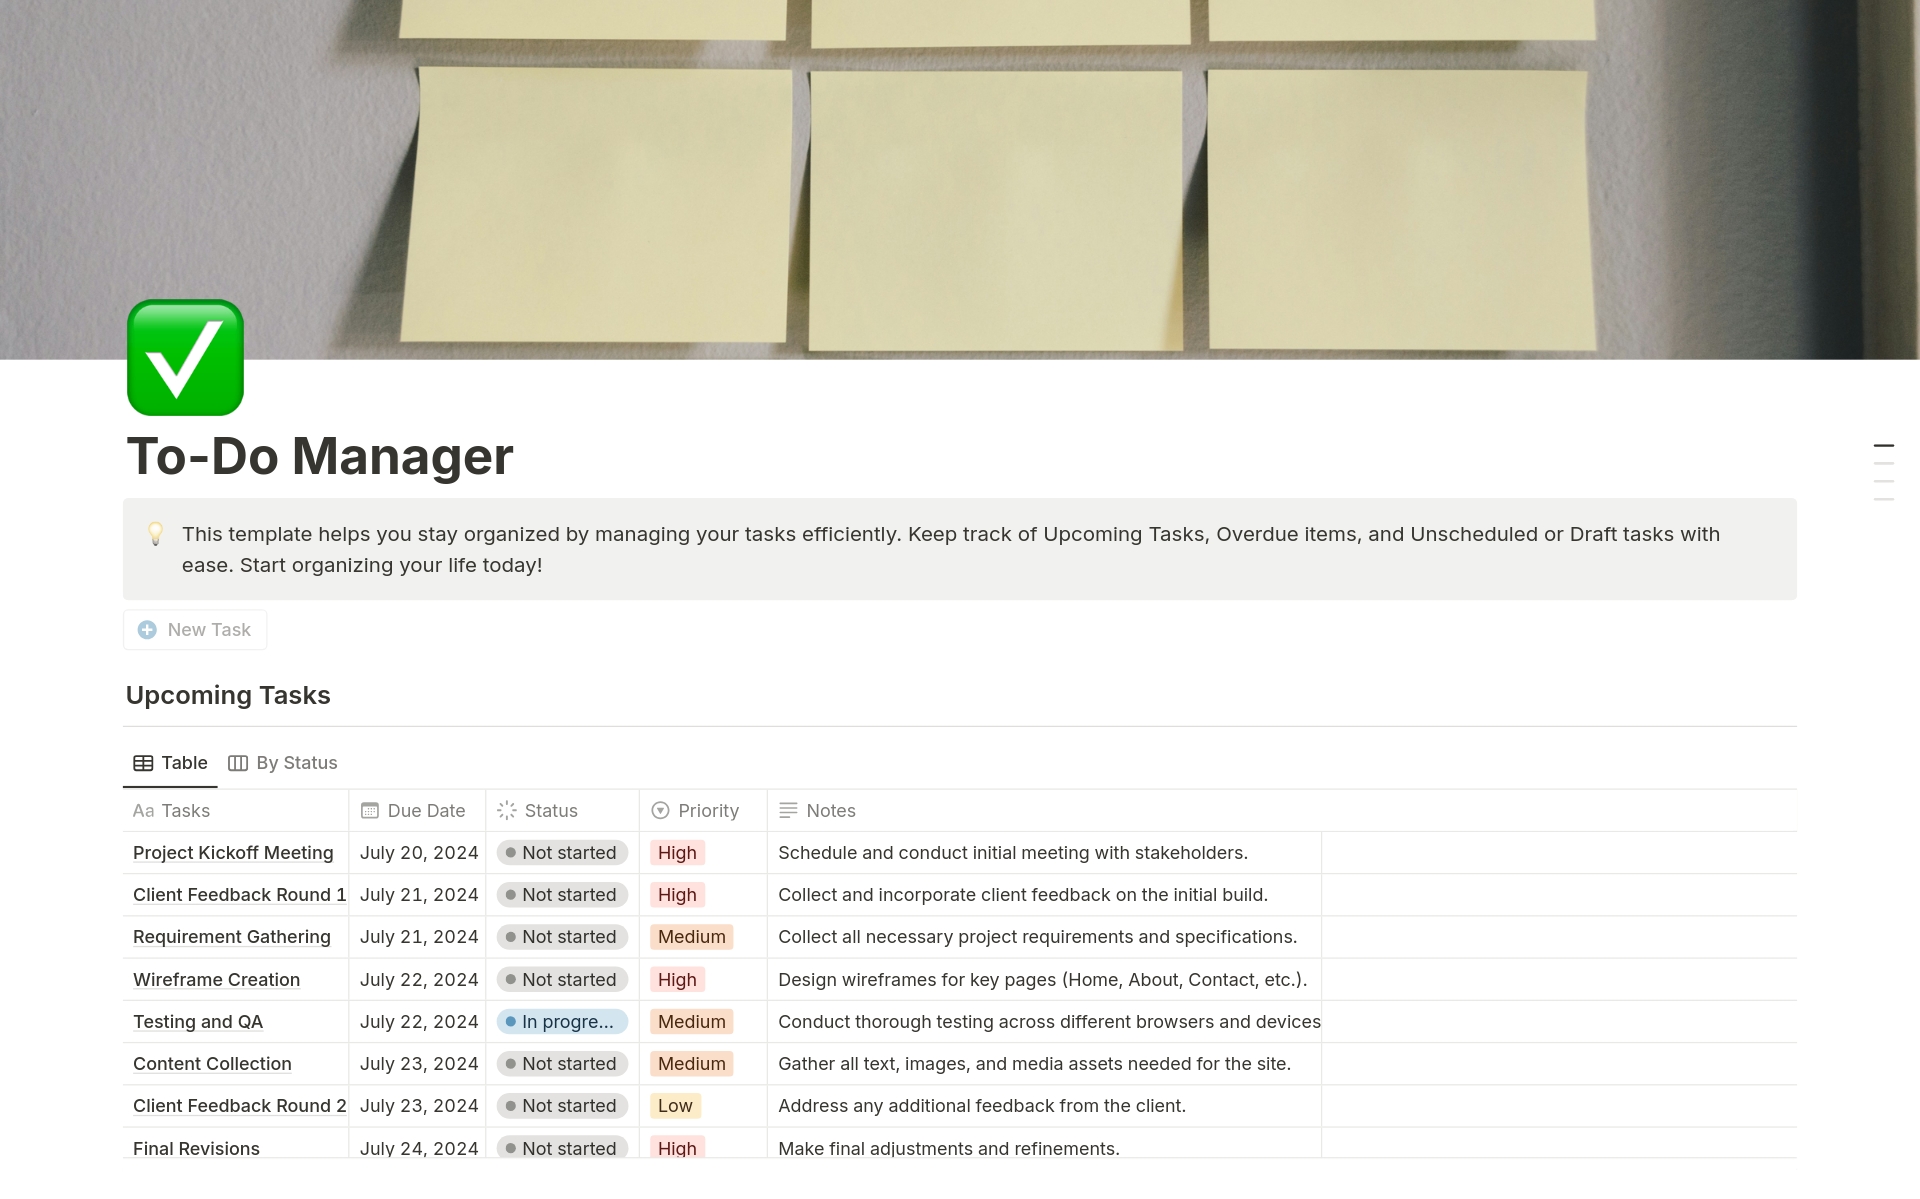 This template helps you stay organized by managing your tasks efficiently. Keep track of Upcoming Tasks, Overdue items, and Unscheduled or Draft tasks with ease. Start organizing your life today!